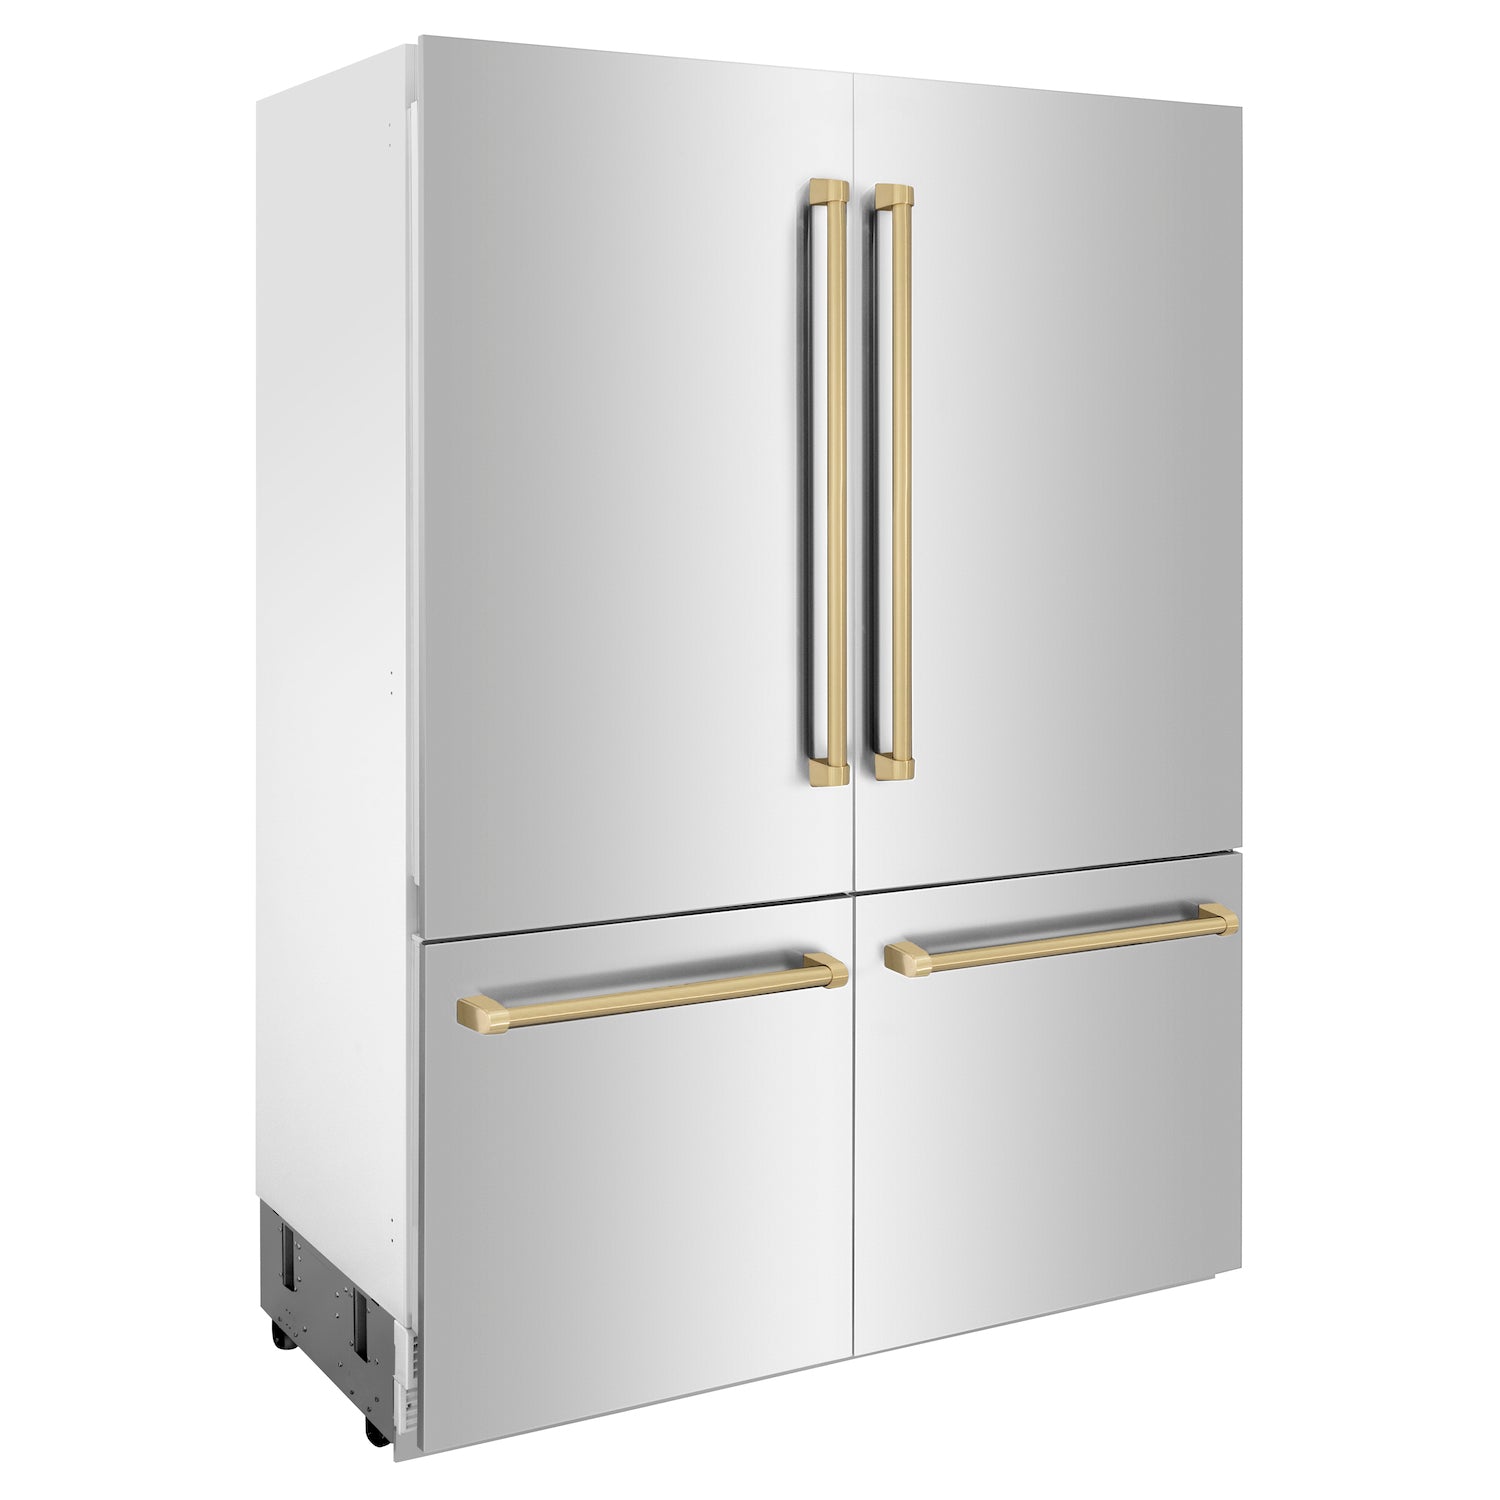 ZLINE 60" Autograph Edition Built-in 4-Door French Door Refrigerator with Internal Water and Ice Dispenser - Stainless Steel with Champagne Bronze Accents